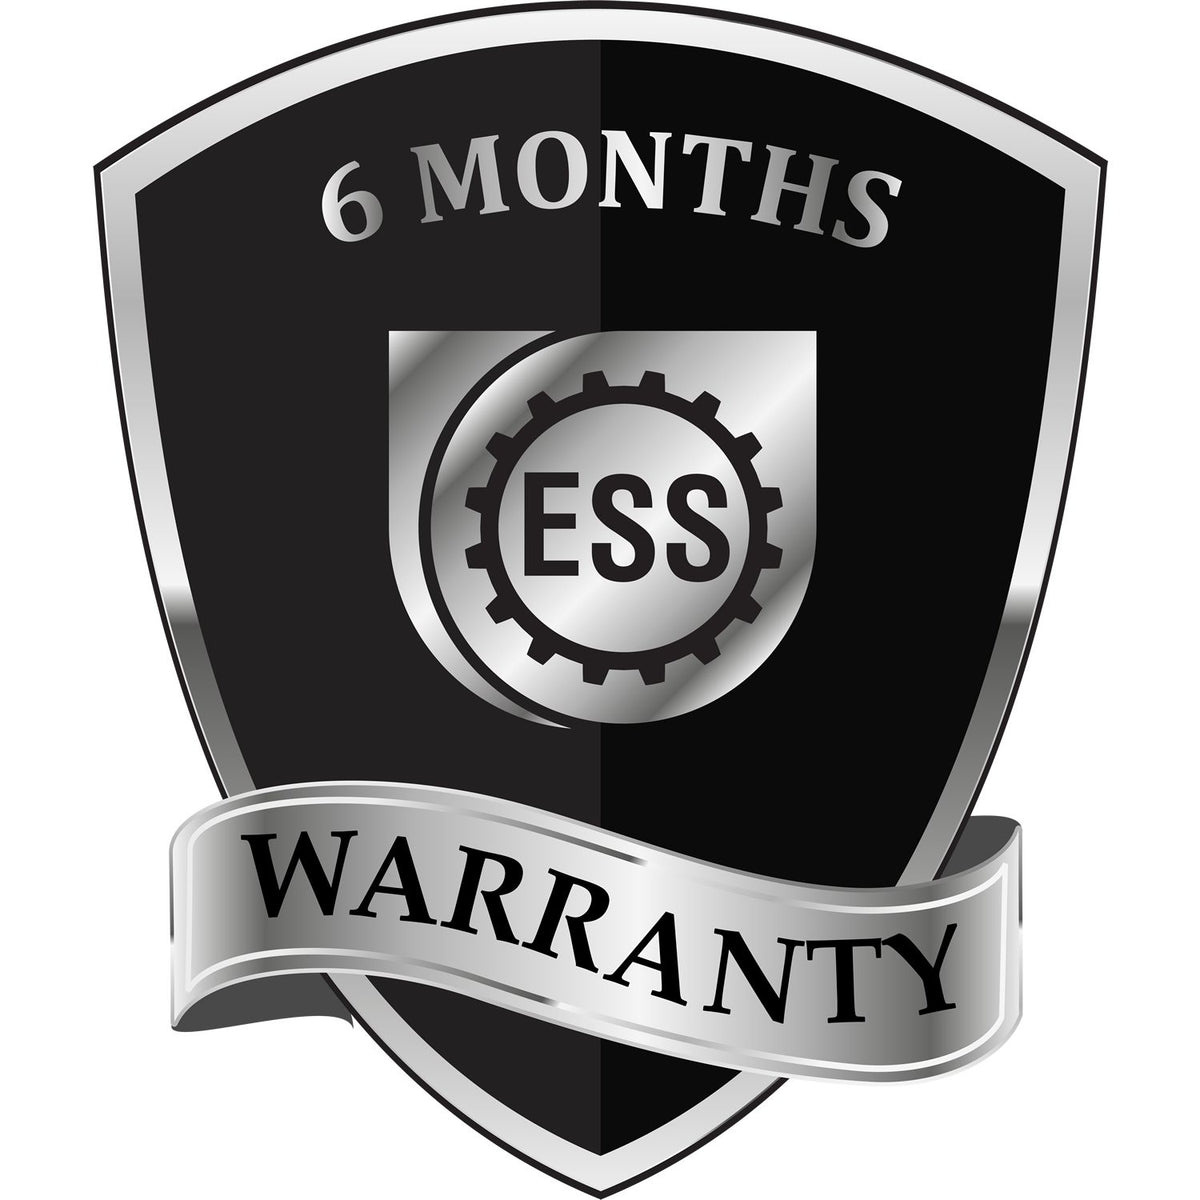 A badge or emblem showing a warranty icon for the Heavy-Duty Georgia Rectangular Notary Stamp